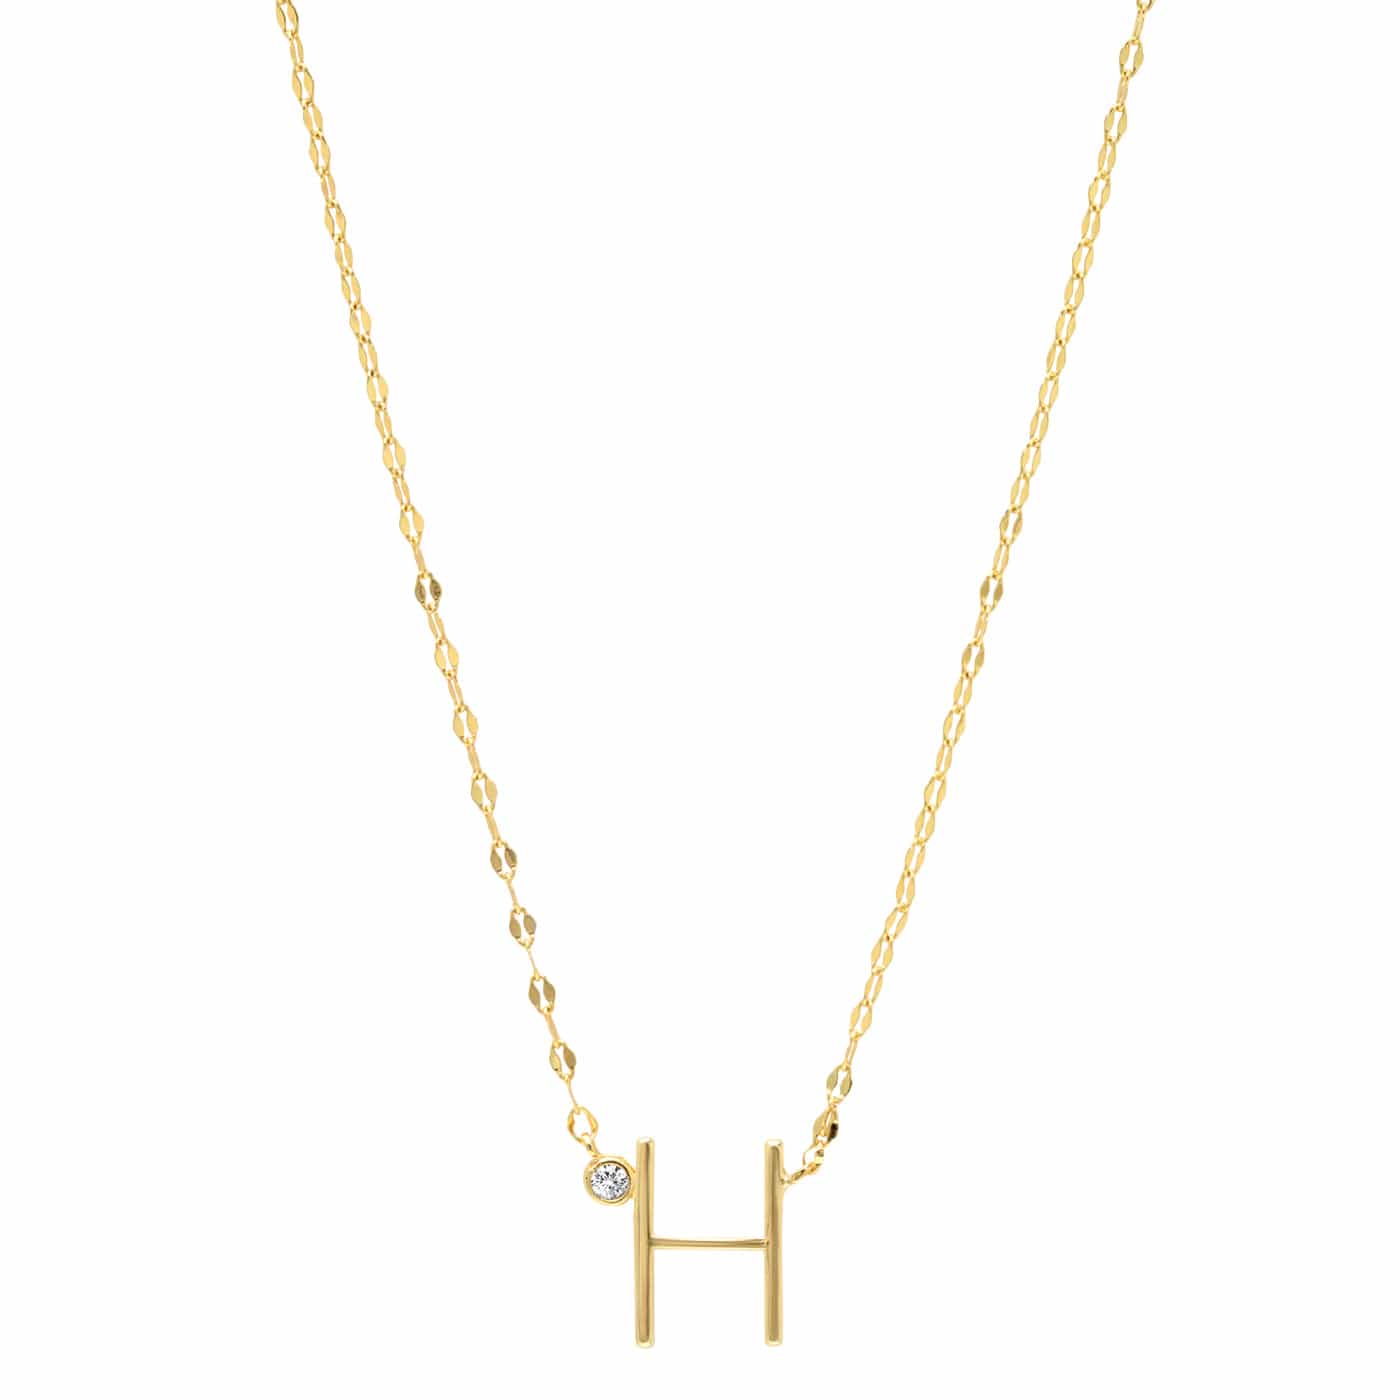 TAI JEWELRY Necklace H Medium Sized Initial Necklace With Cz Accent